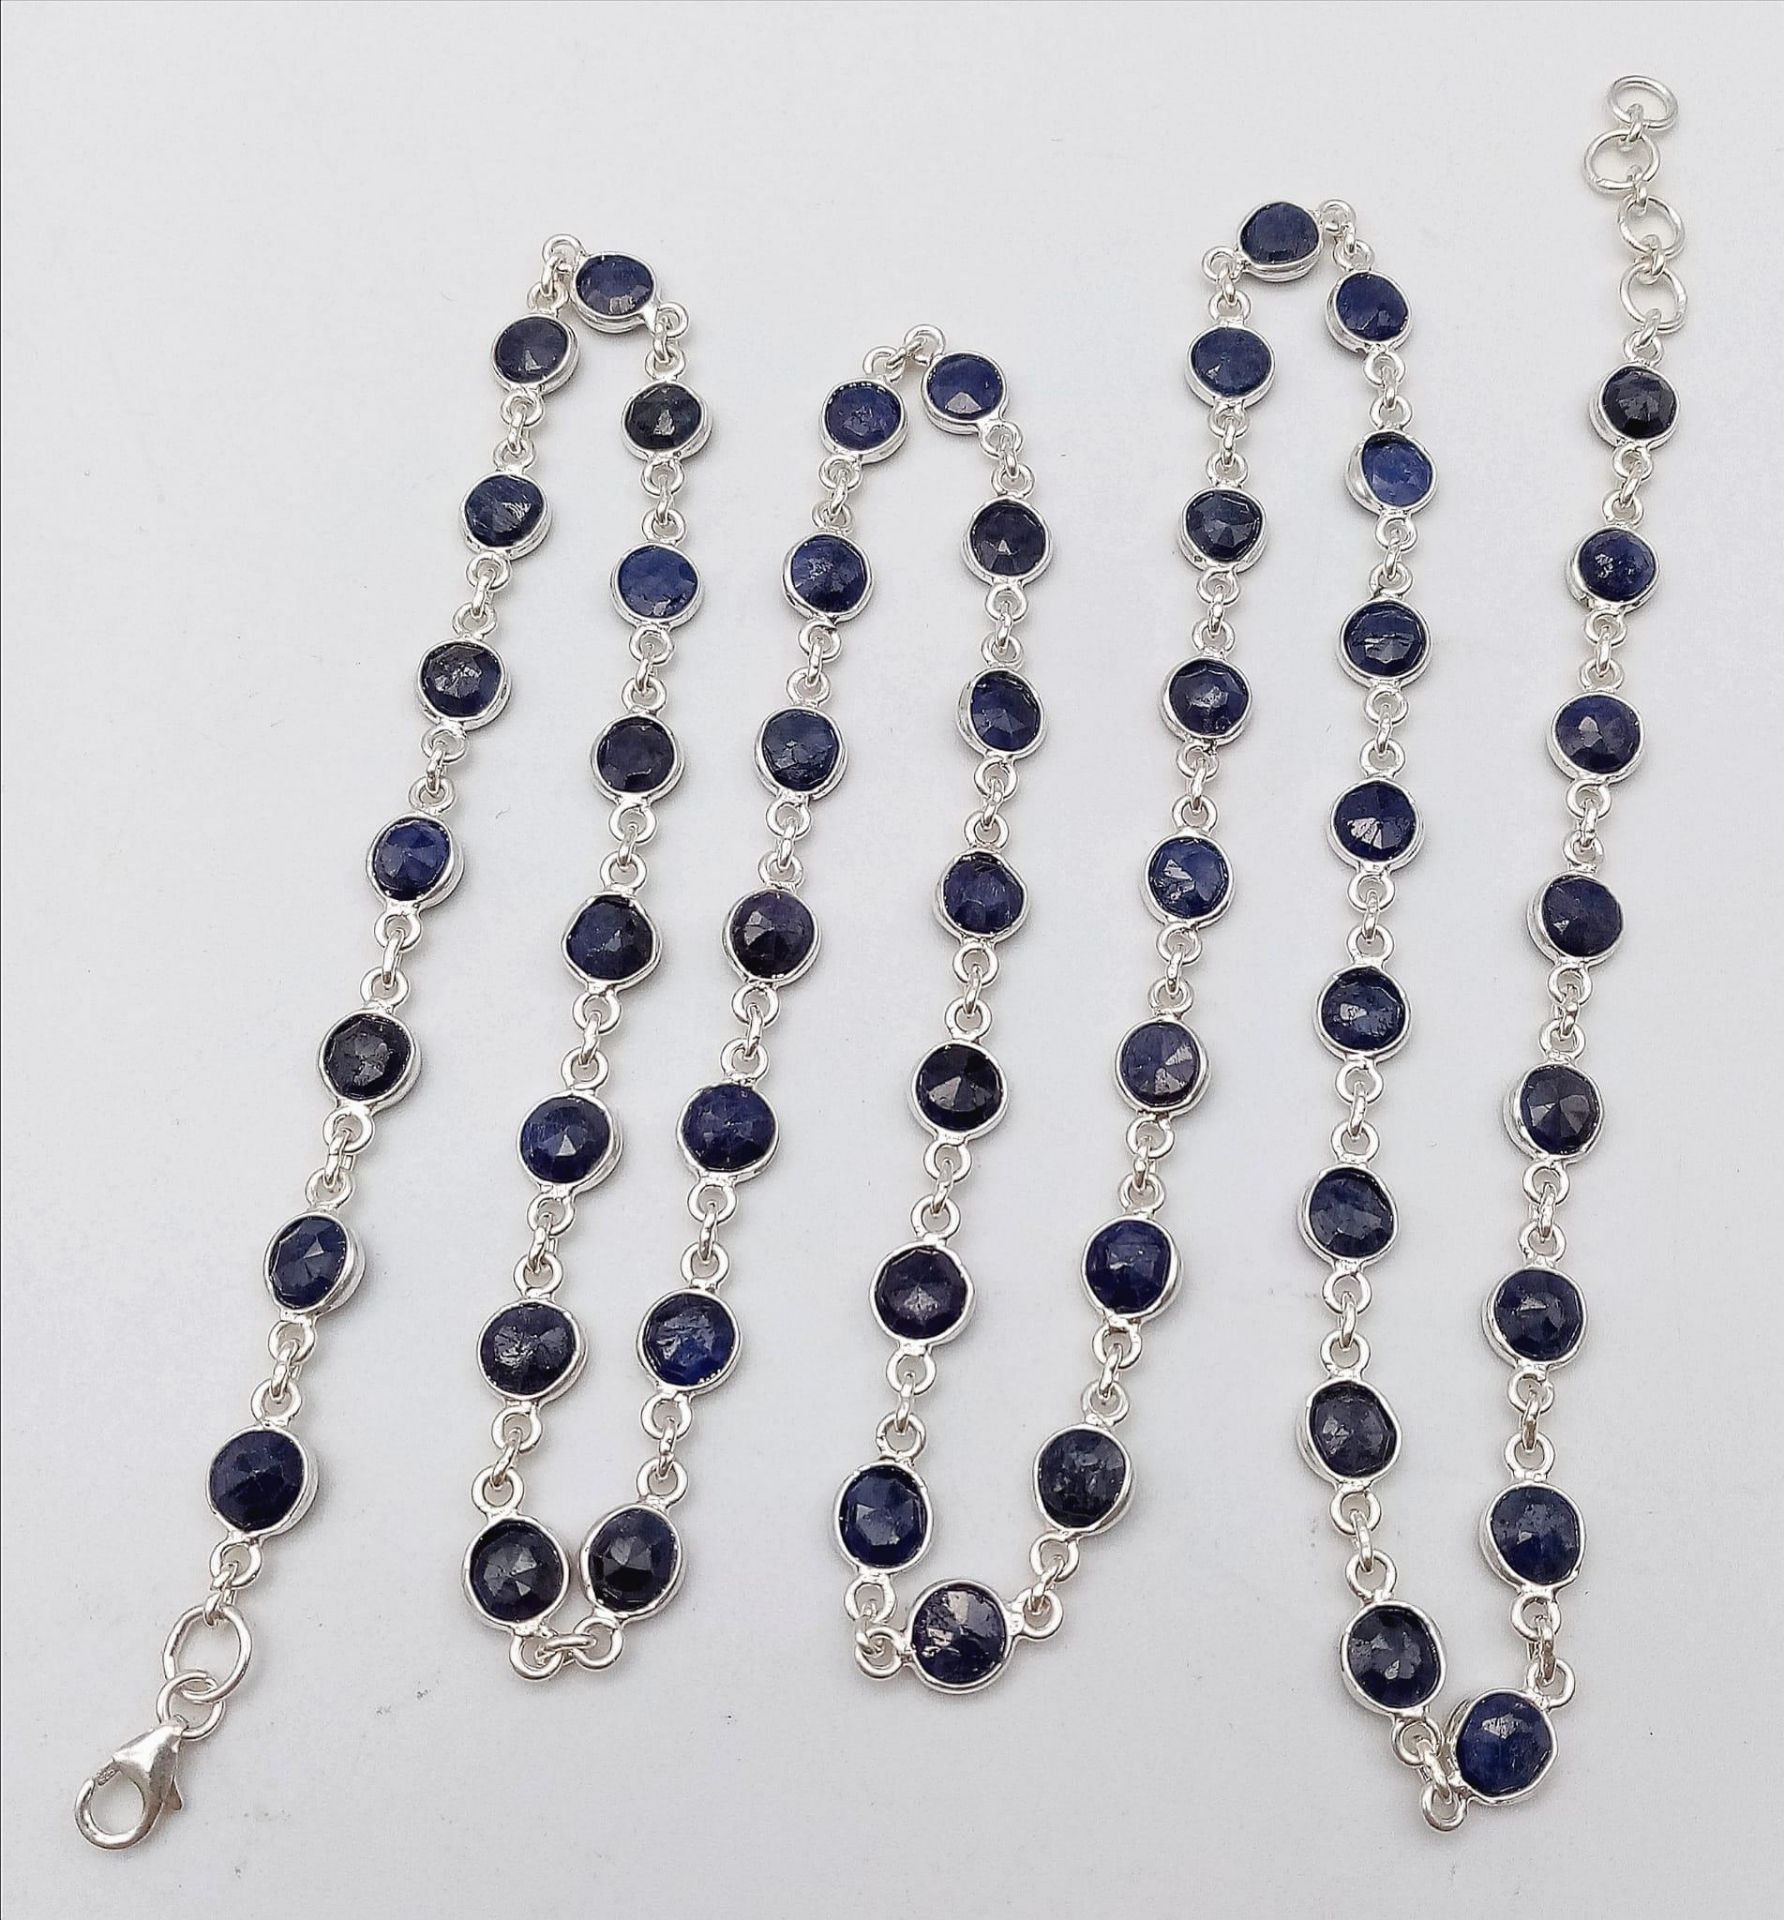 A Round Cut Blue Sapphire Gemstone Chain Necklace set in 925 Silver. 74cm length. 23.6g weight. Ref: